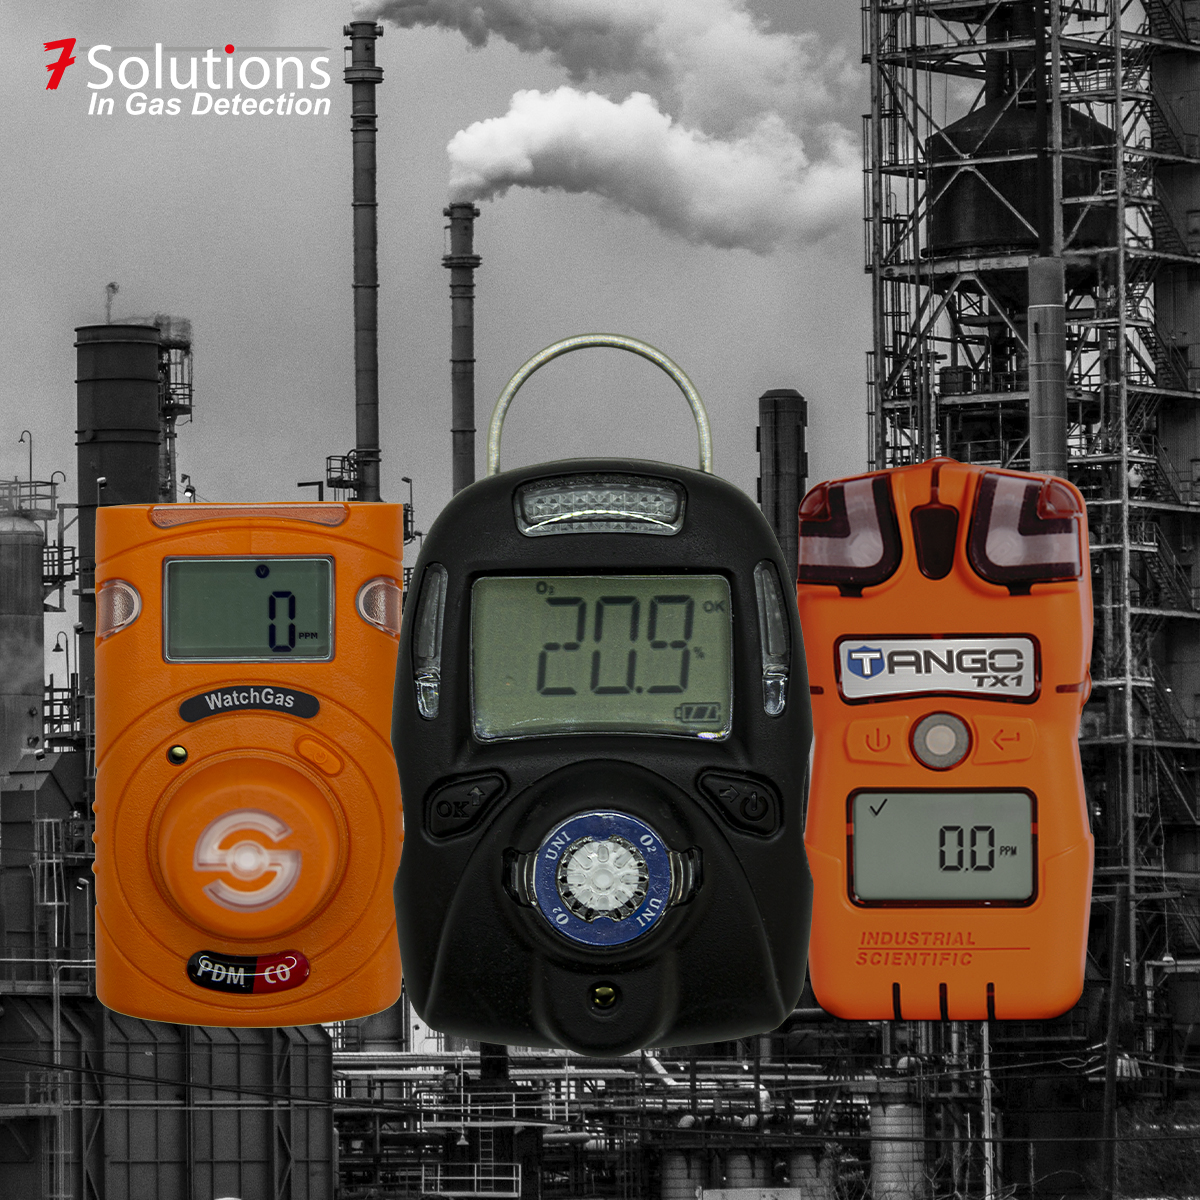 Single gas monitors: why, where, and how should you use them?